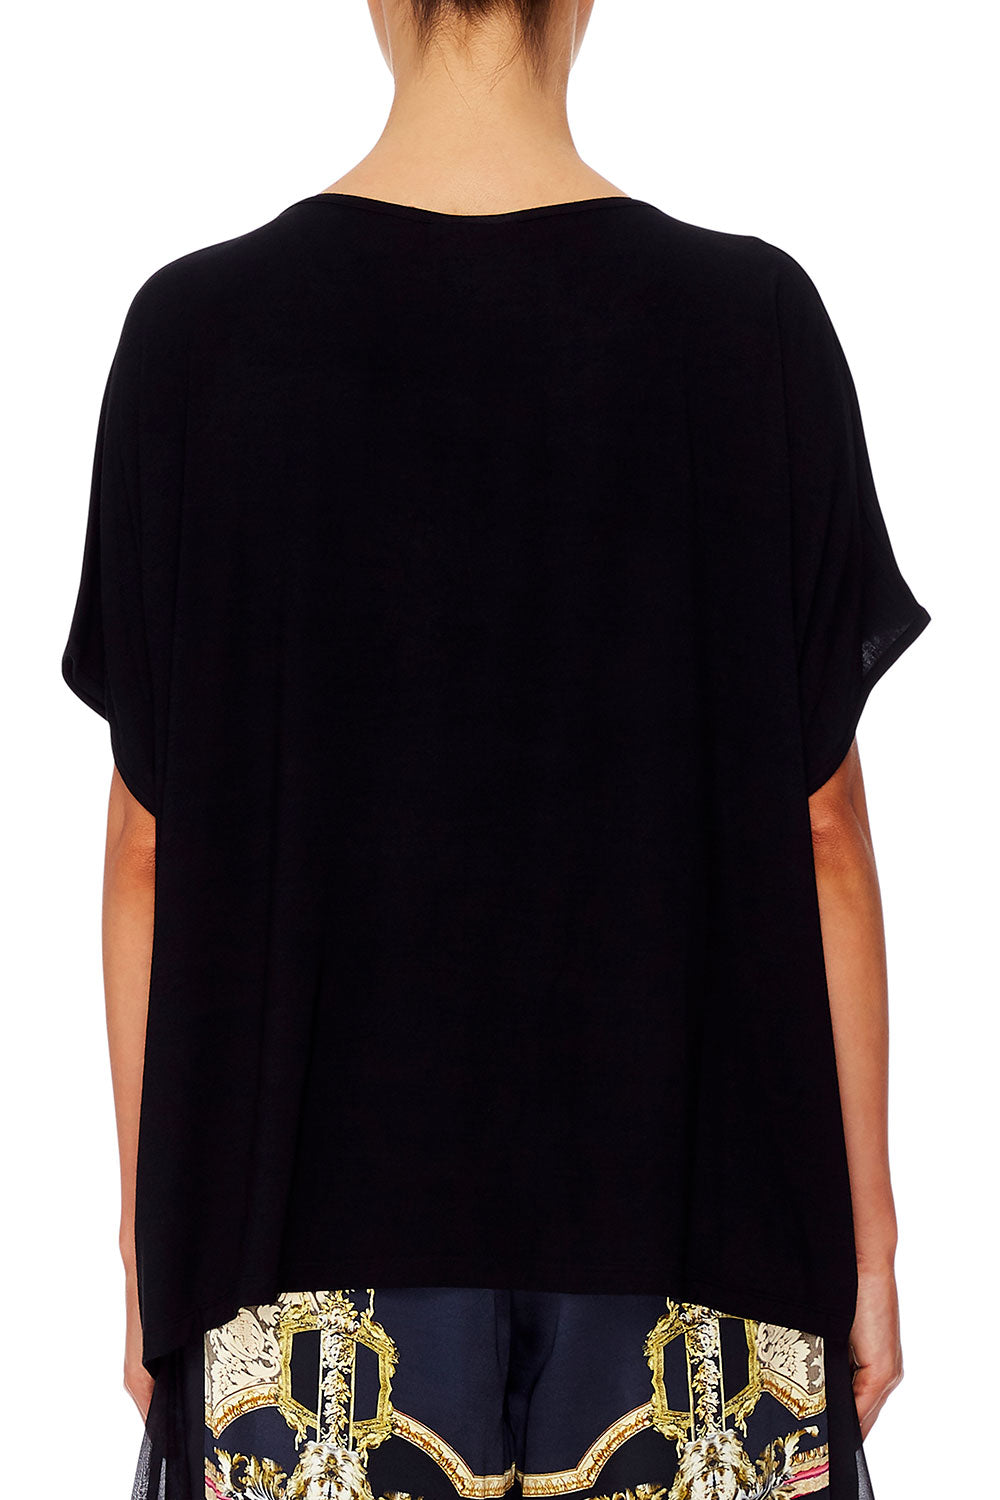 LOOSE FIT ROUND NECK TEE MIDNIGHT MEETING